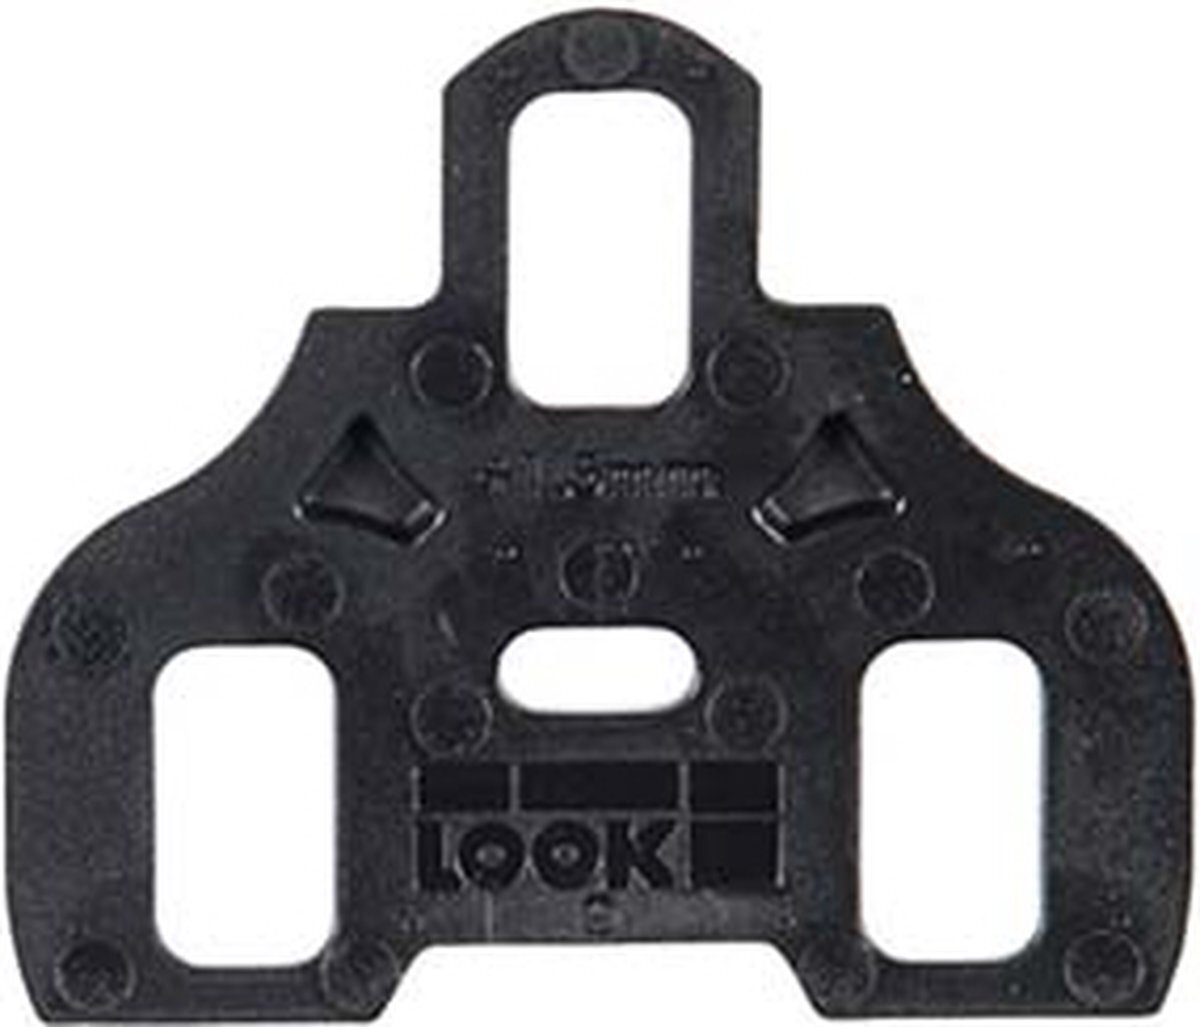 Look Keo Spacer For Flat Sole Pedals